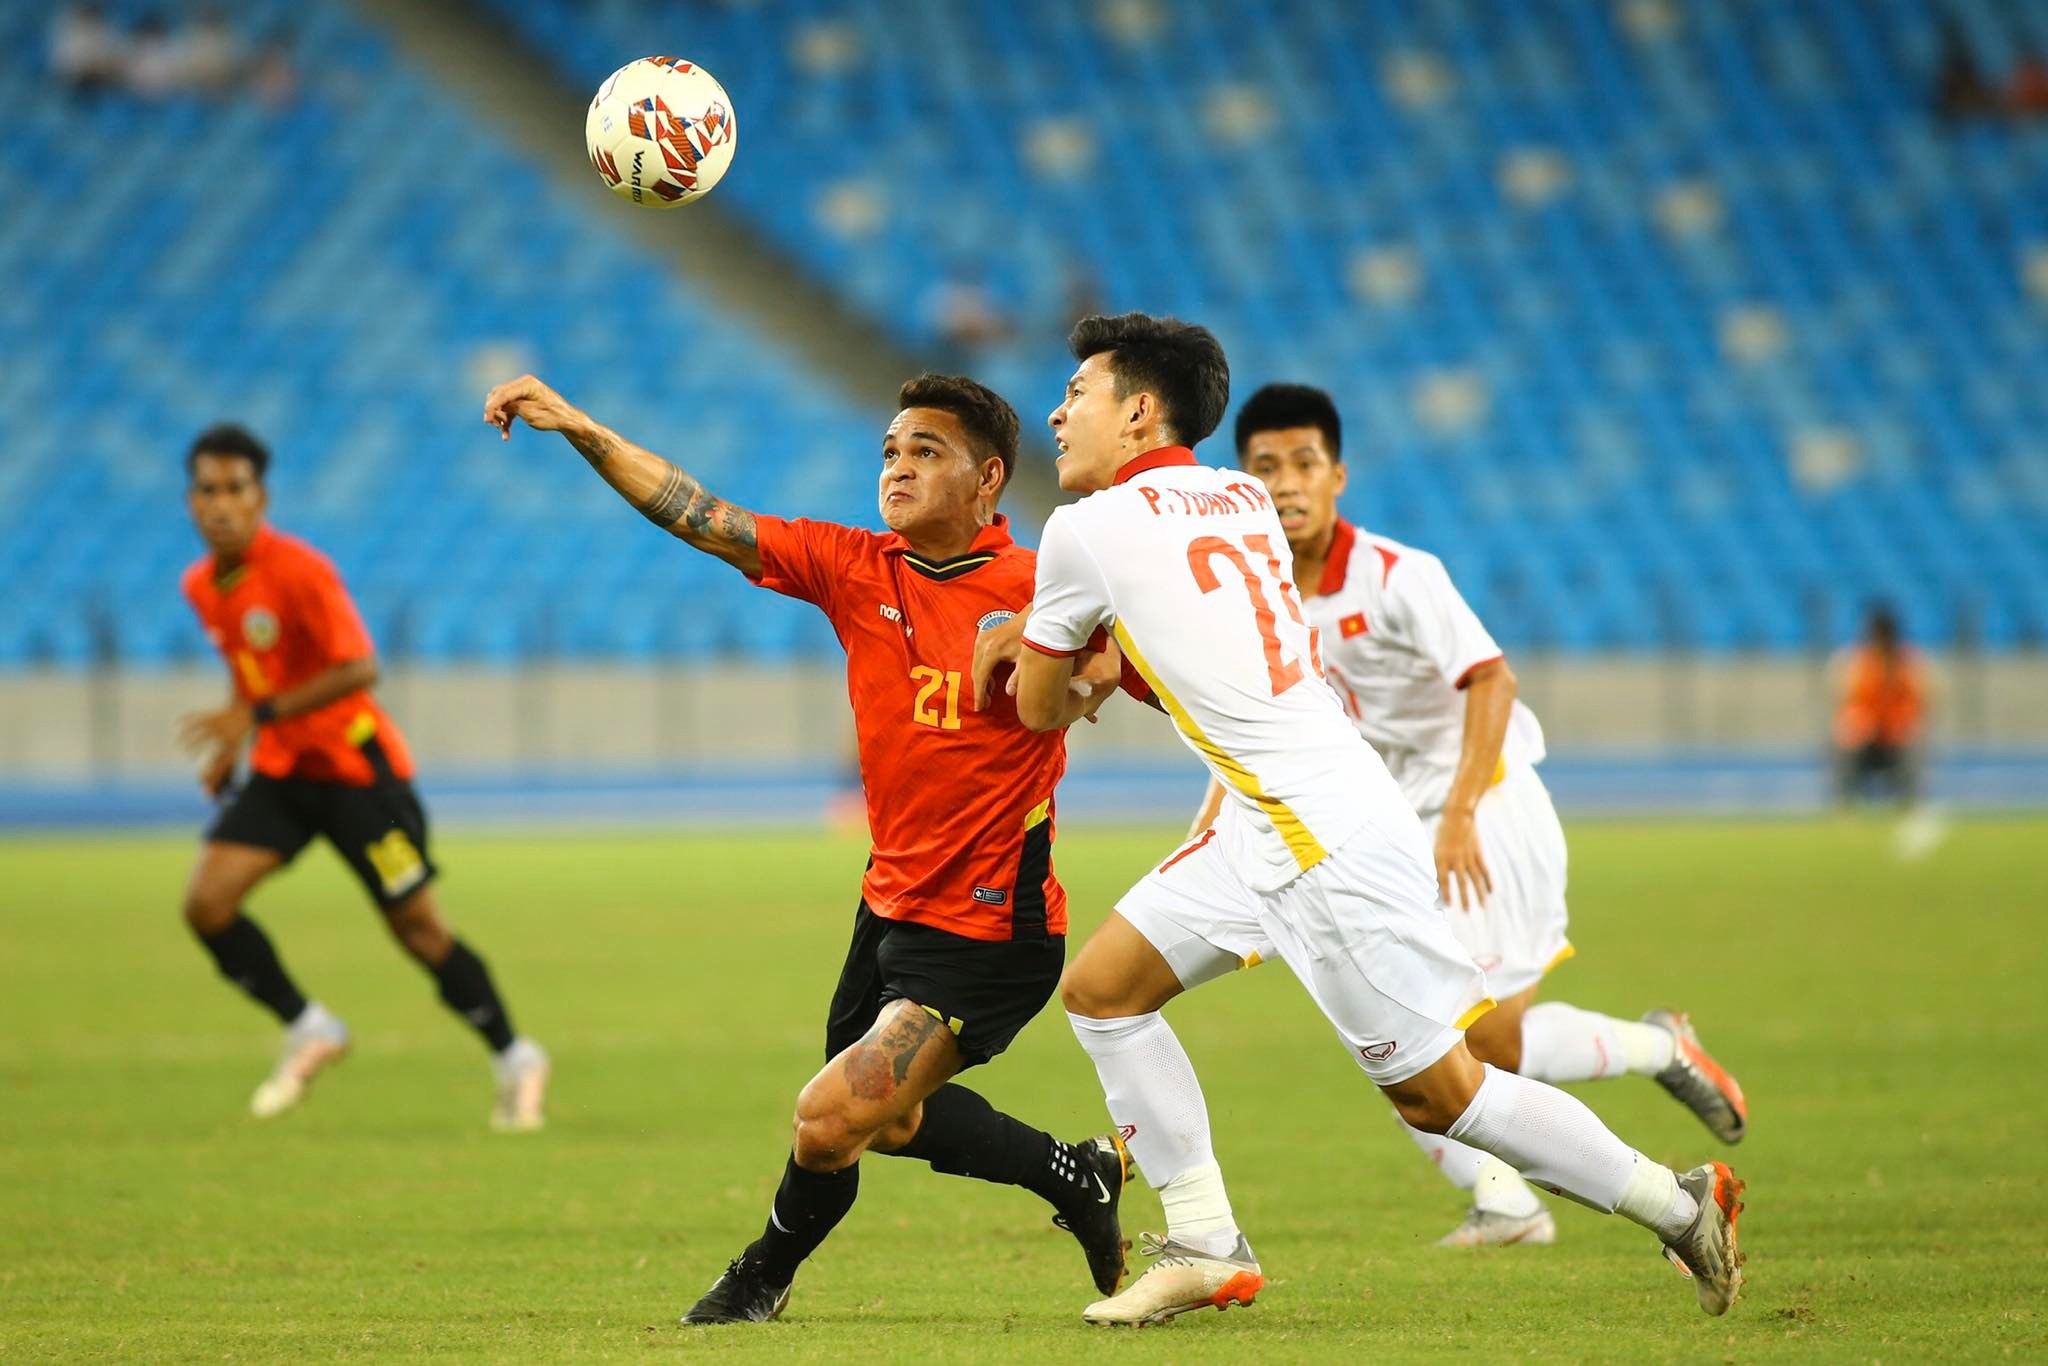 Vietnam beat Timor-Leste on penalties to play AFF U23 Championship final with Thailand